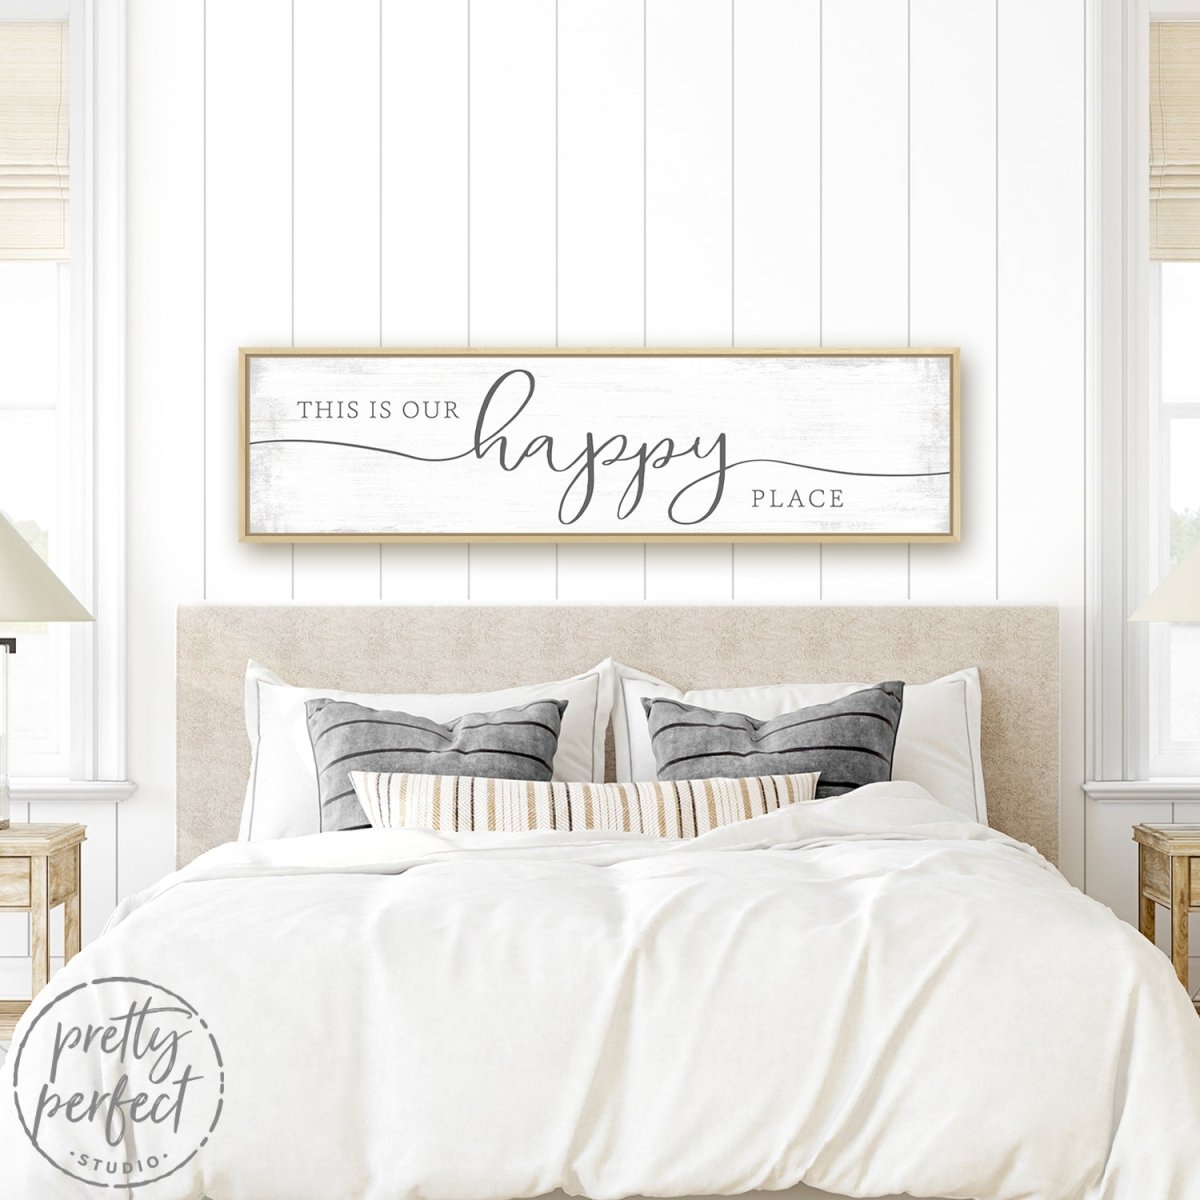 This Is Our Happy Place Sign Above Bed In Bedroom - Pretty Perfect Studio